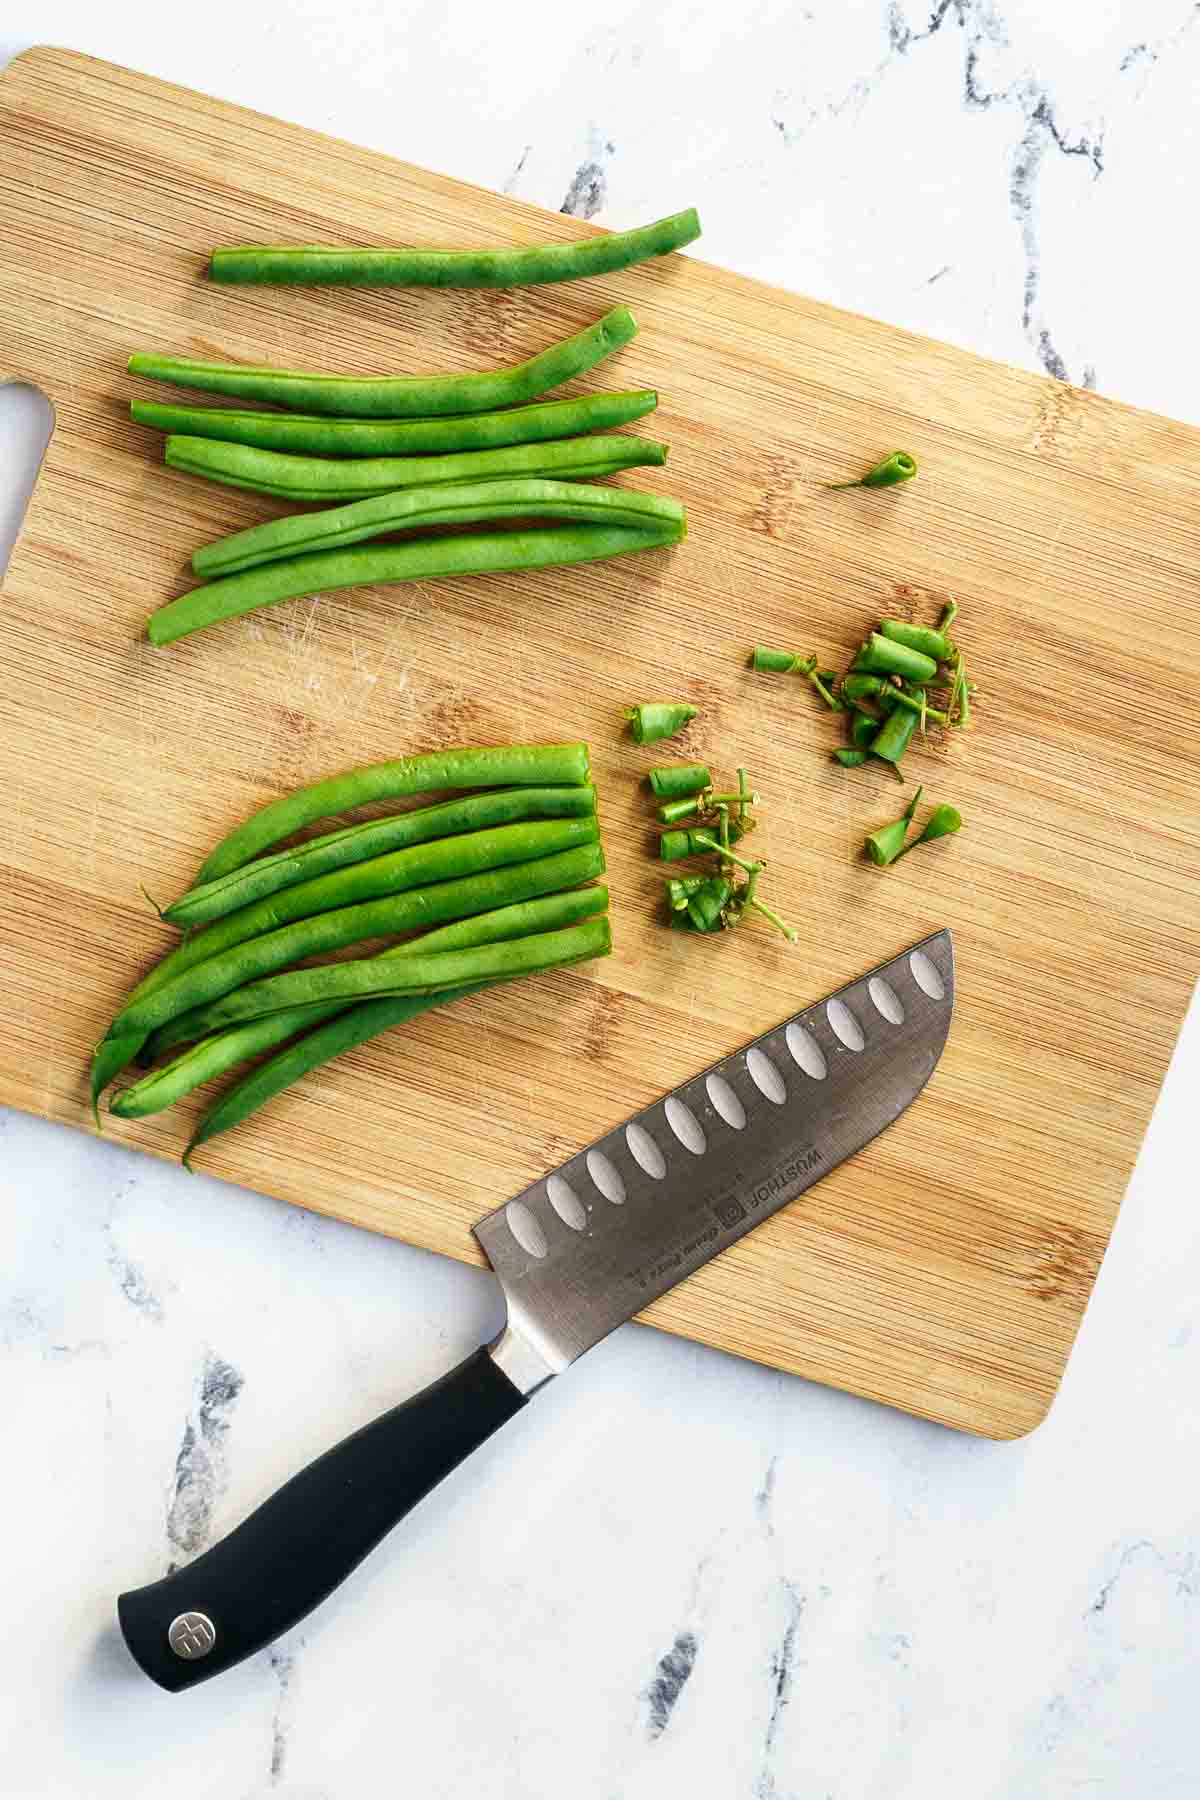 cutting board with fresh green beans with ends trimmed off